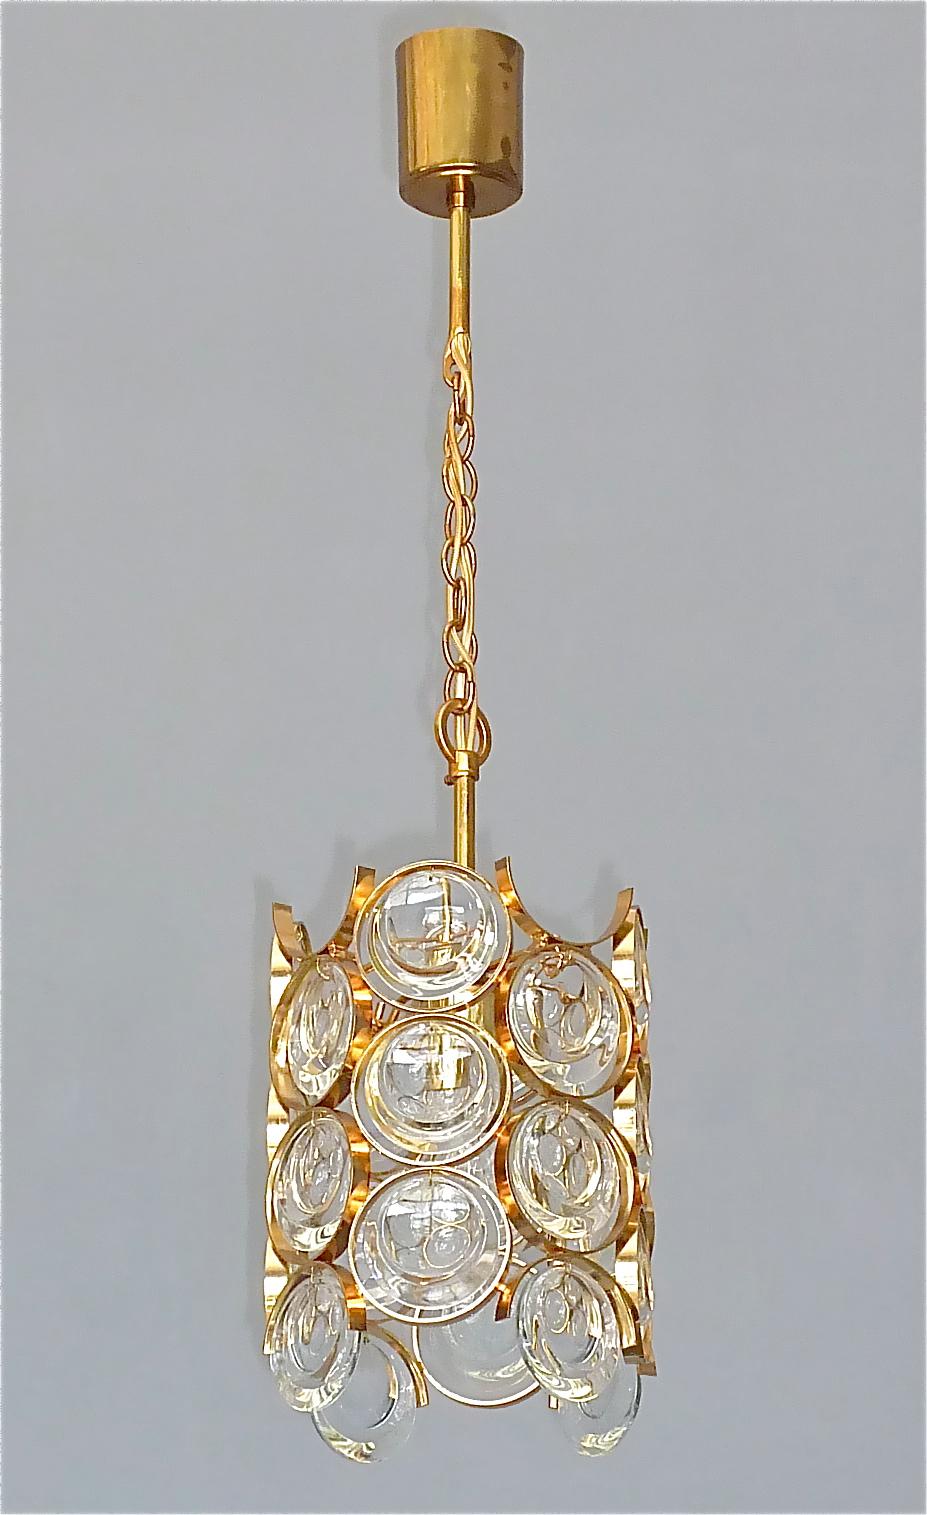 Gilt brass metal and crystal glass chandelier made by Palwa, Germany circa 1960-1970. The chain-hanging length-adjustable pendant lamp has a gilt brass metal construction in Op Art Pop Art Look with beveled crystals glass discs within rings and is